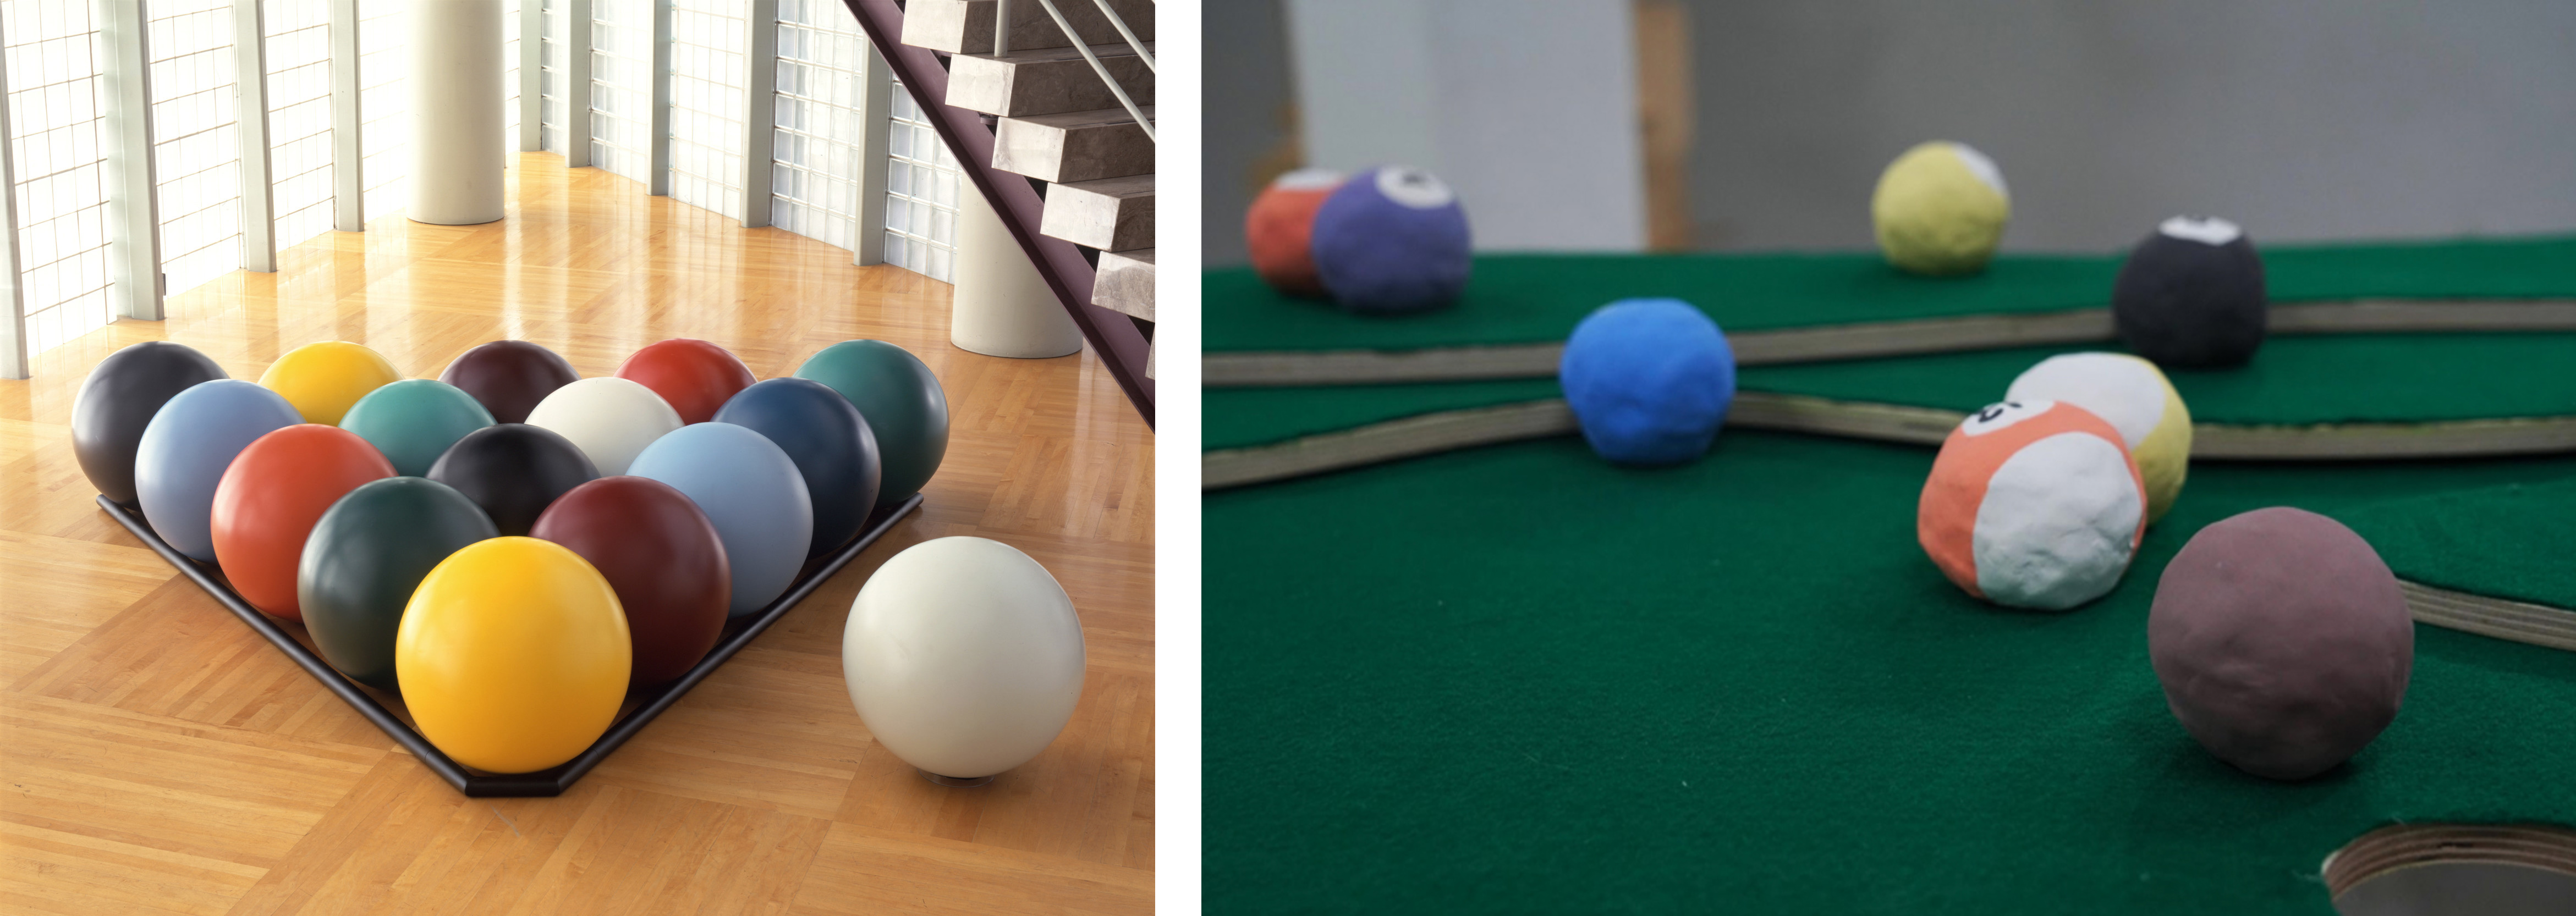 Left (LACMA selection): Claes Oldenburg, Giant Pool Balls, 1967, Los Angeles County Museum of Art, anonymous gift through the Contemporary Art Council, © Claes Oldenburg, photo © Museum Associates/LACMA; Right (Artist work): Manyu Gao, Bowl and Pool—Pool Table (detail), 2019, photo courtesy of the artist